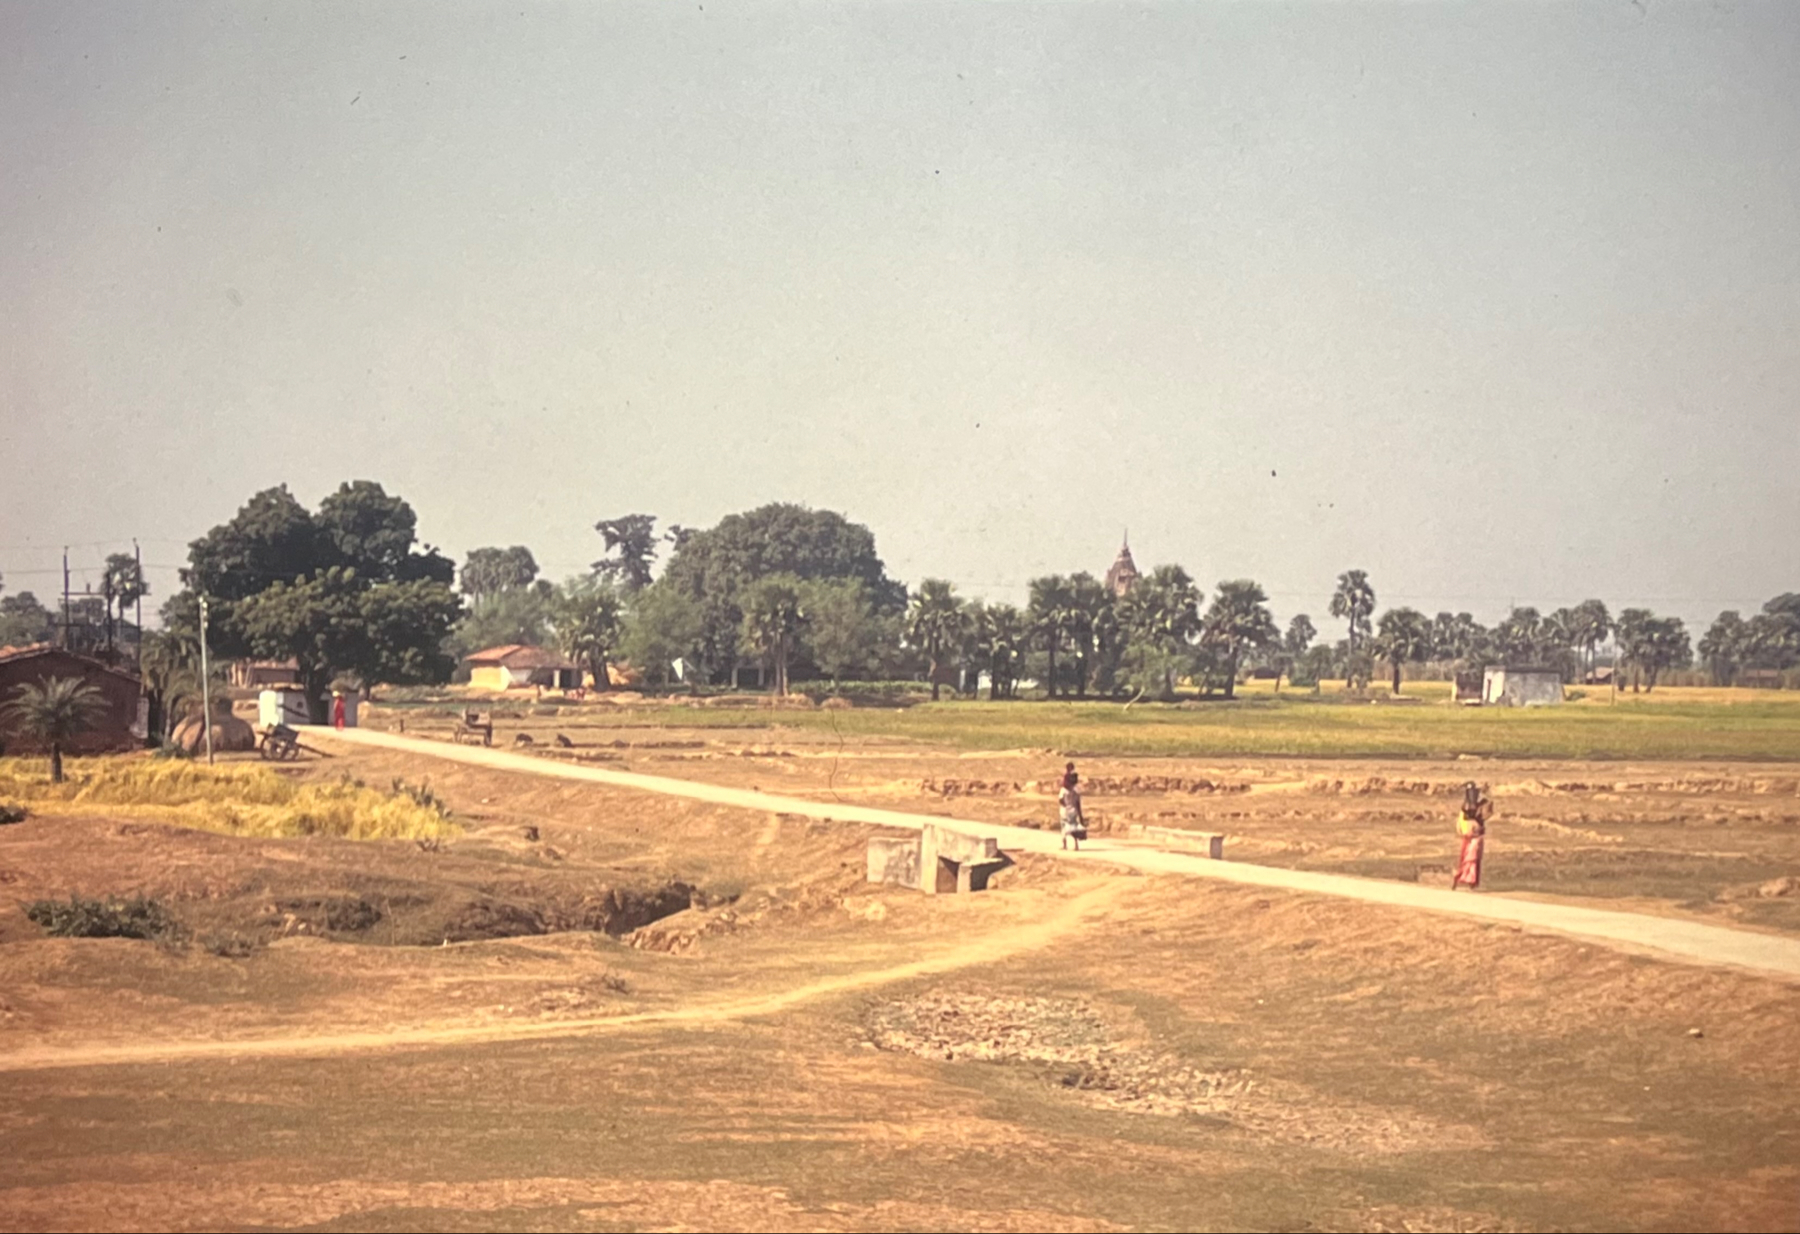 Arriving into Bodhgaya. In the distance the Mahabodhi Temple rises up above trees. Fields and dusty open ground in the foreground. A few people walking on a single track road through the center of the image.